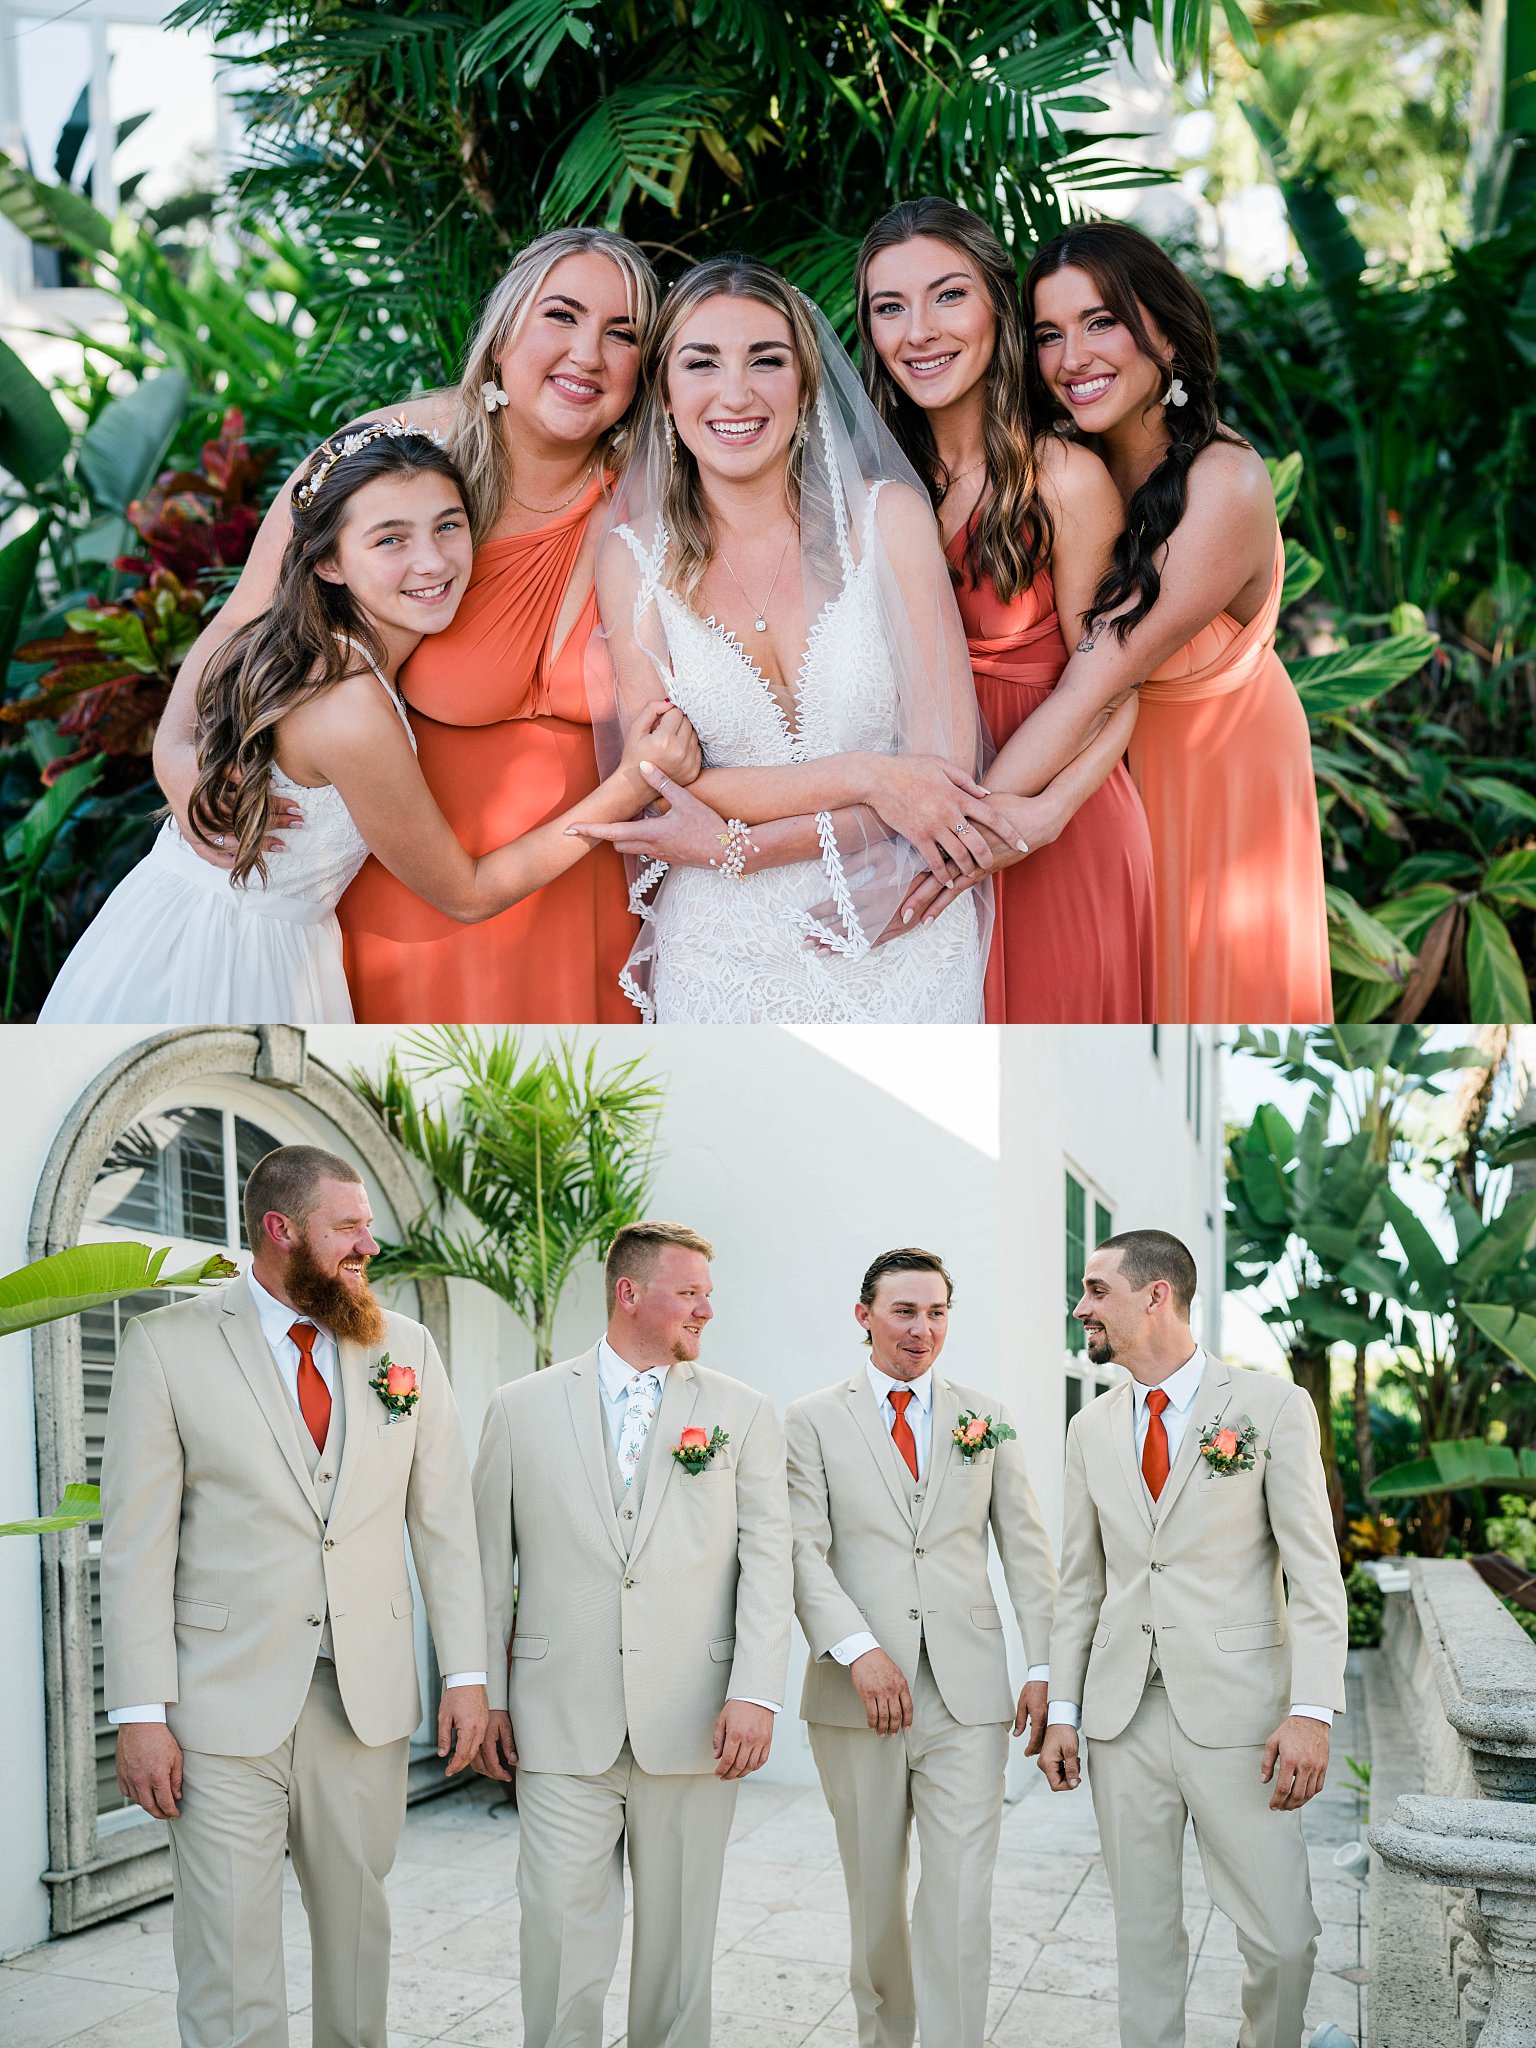 Bridal party wears tans and orange colors for Old Florida style wedding in Southwest Florida